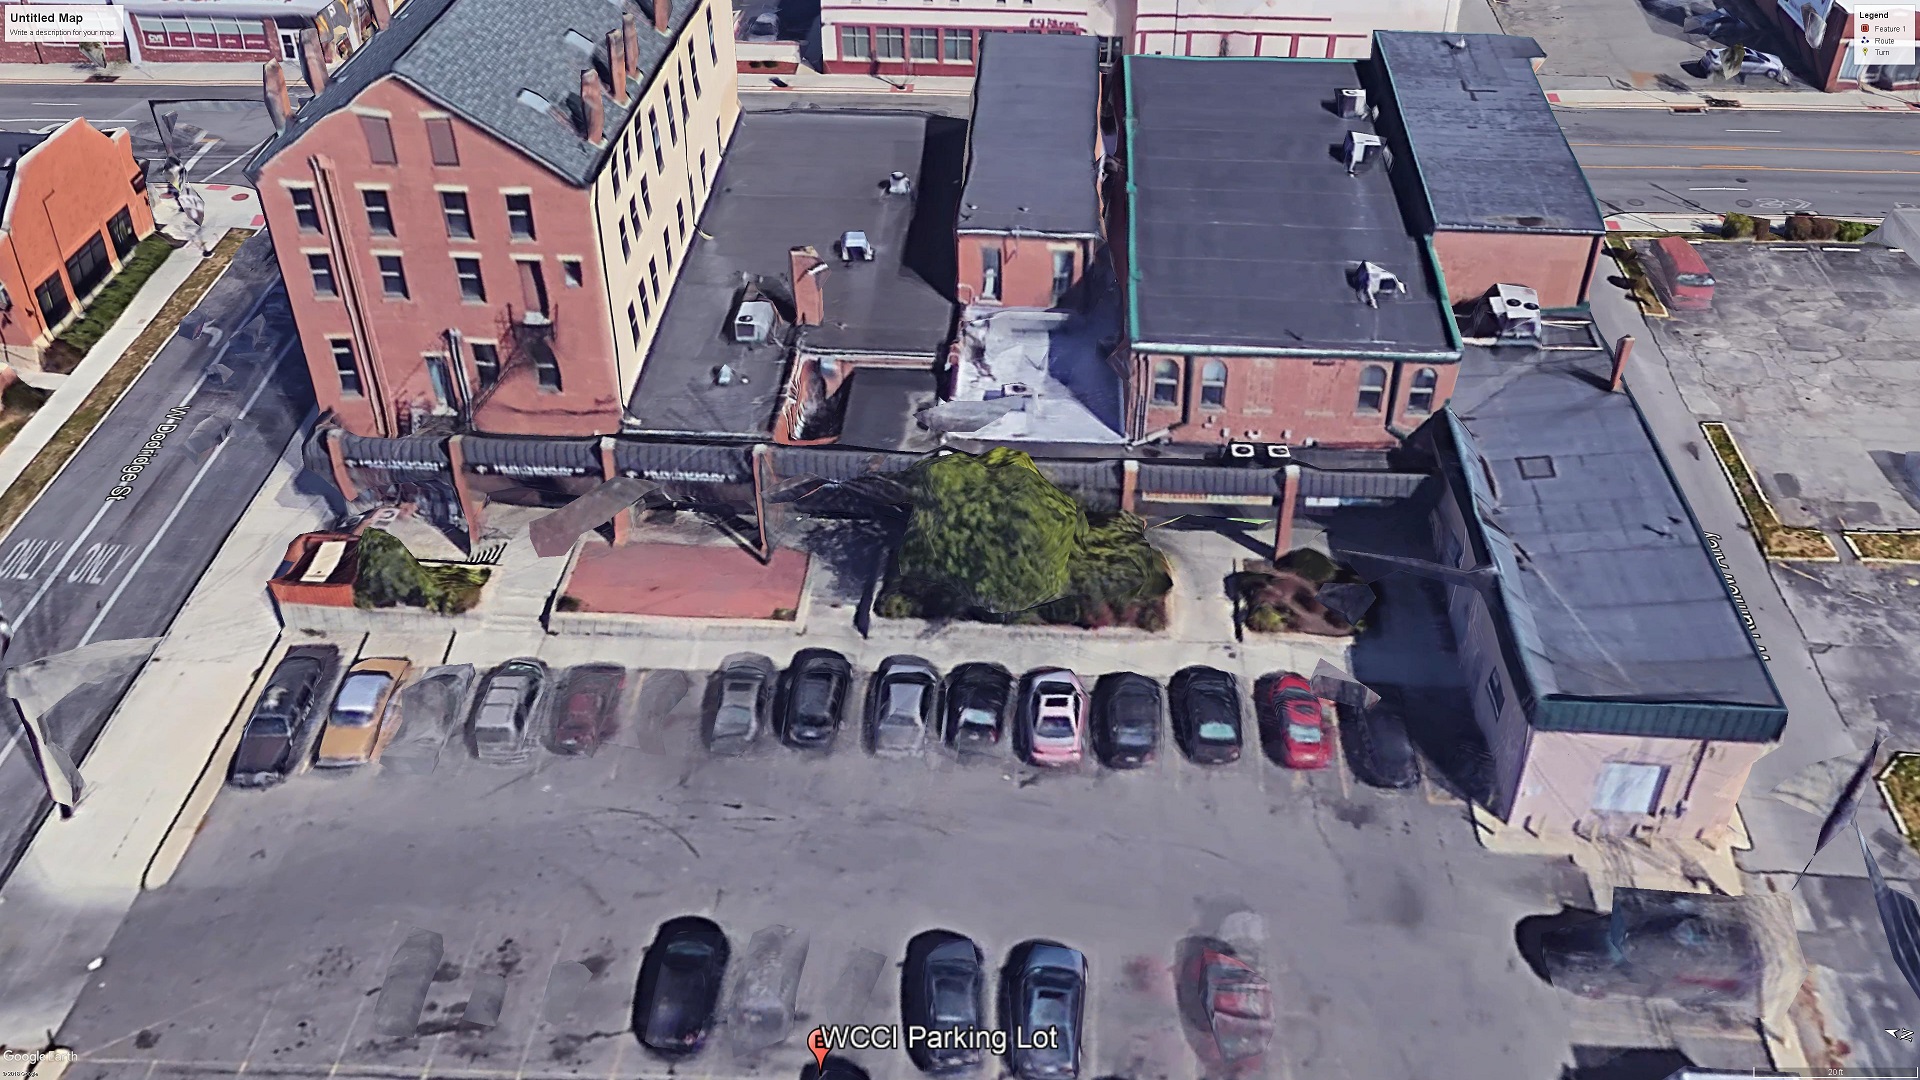 3D Rendering of WCCI Building through the eyes of Google Earth.